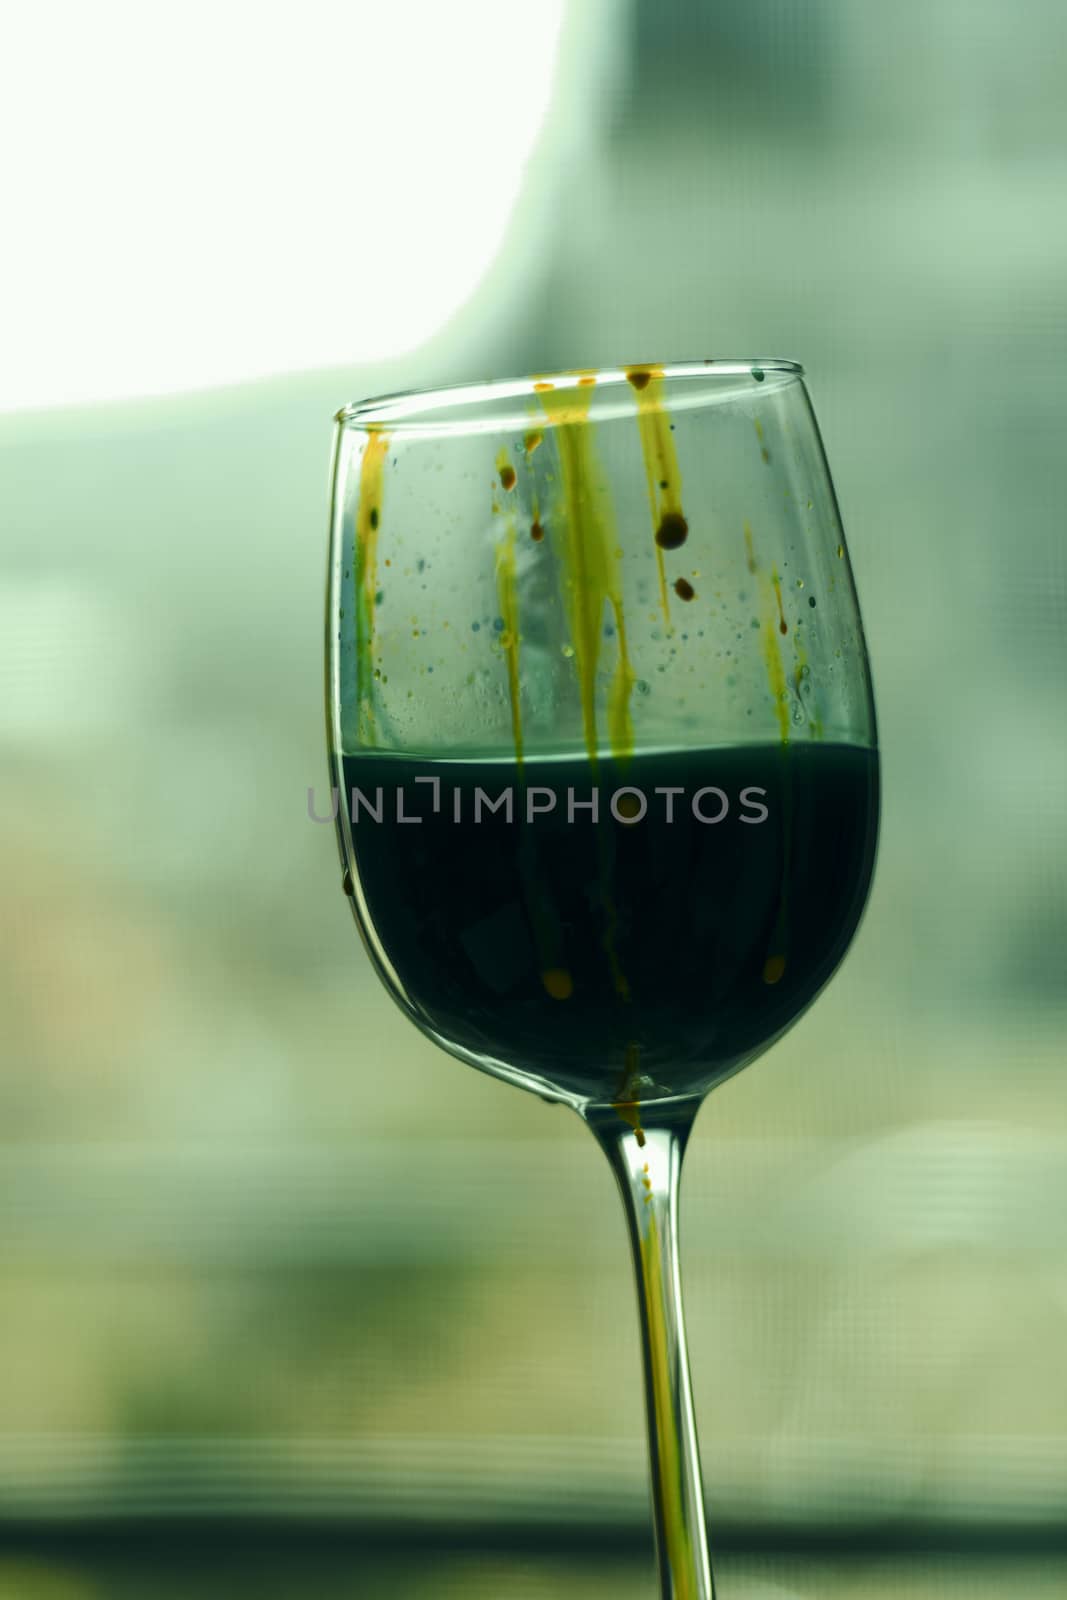 Paint in wineglass, red and blue colors water, art photo.